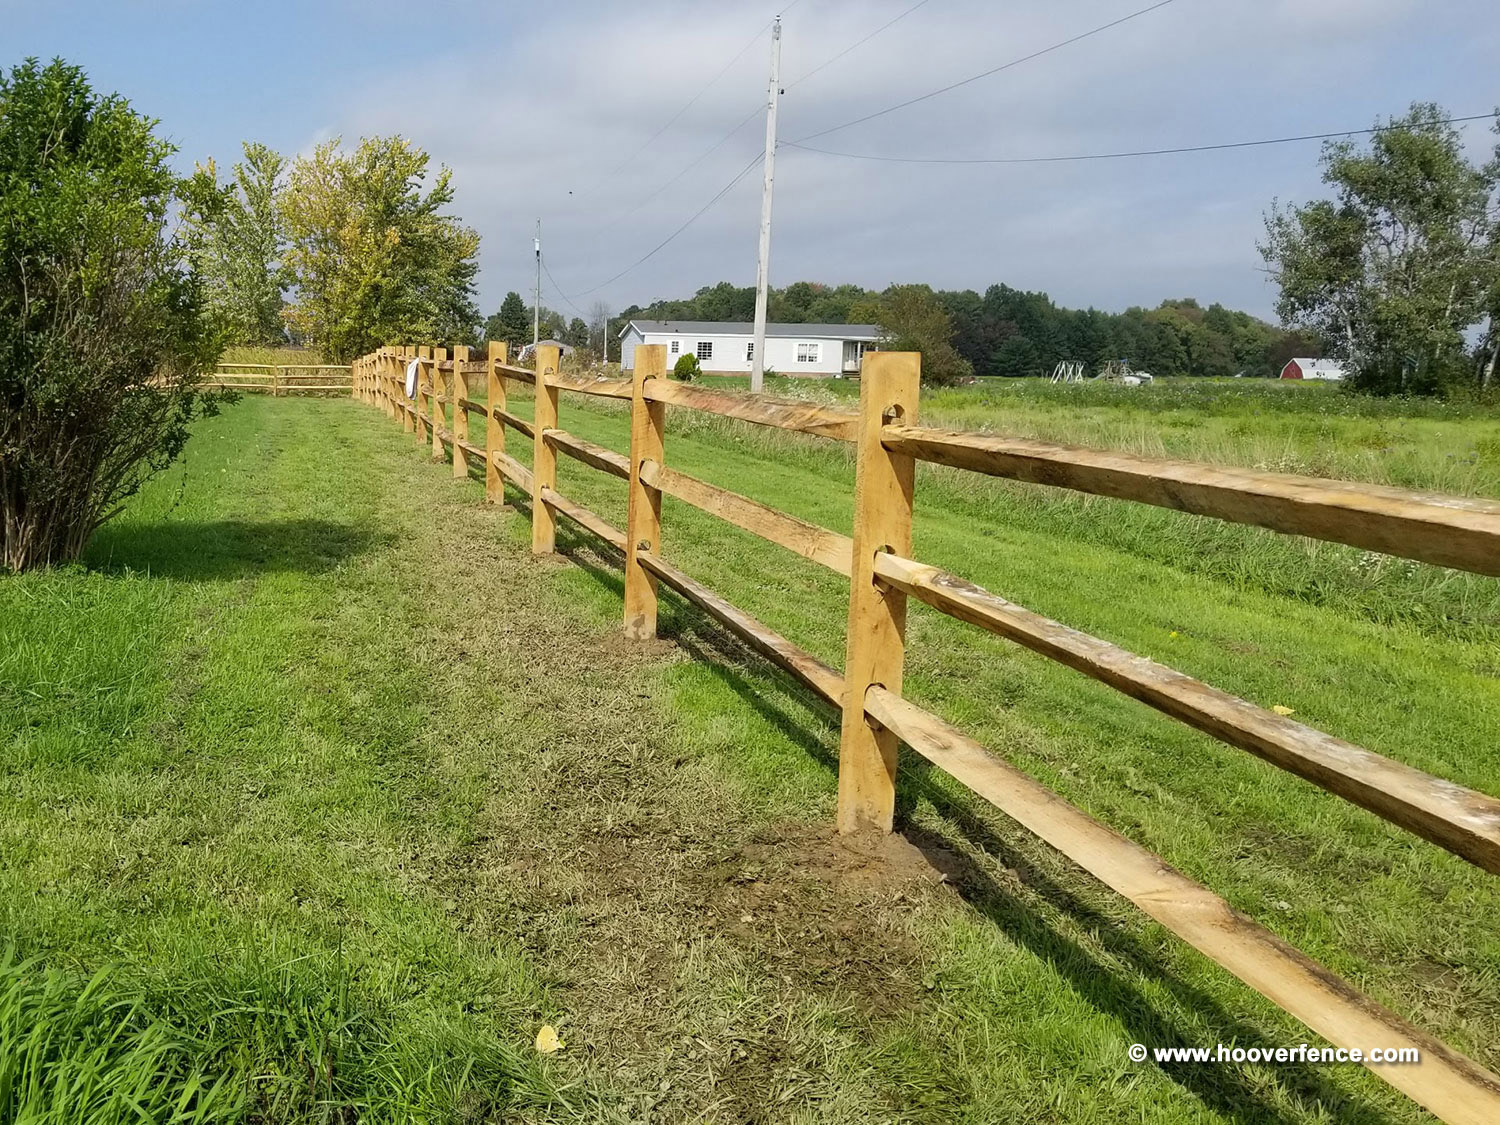 West Virginia Lap Rail Fence Installation by Hoover Fence - Beloit, OH 10-2018